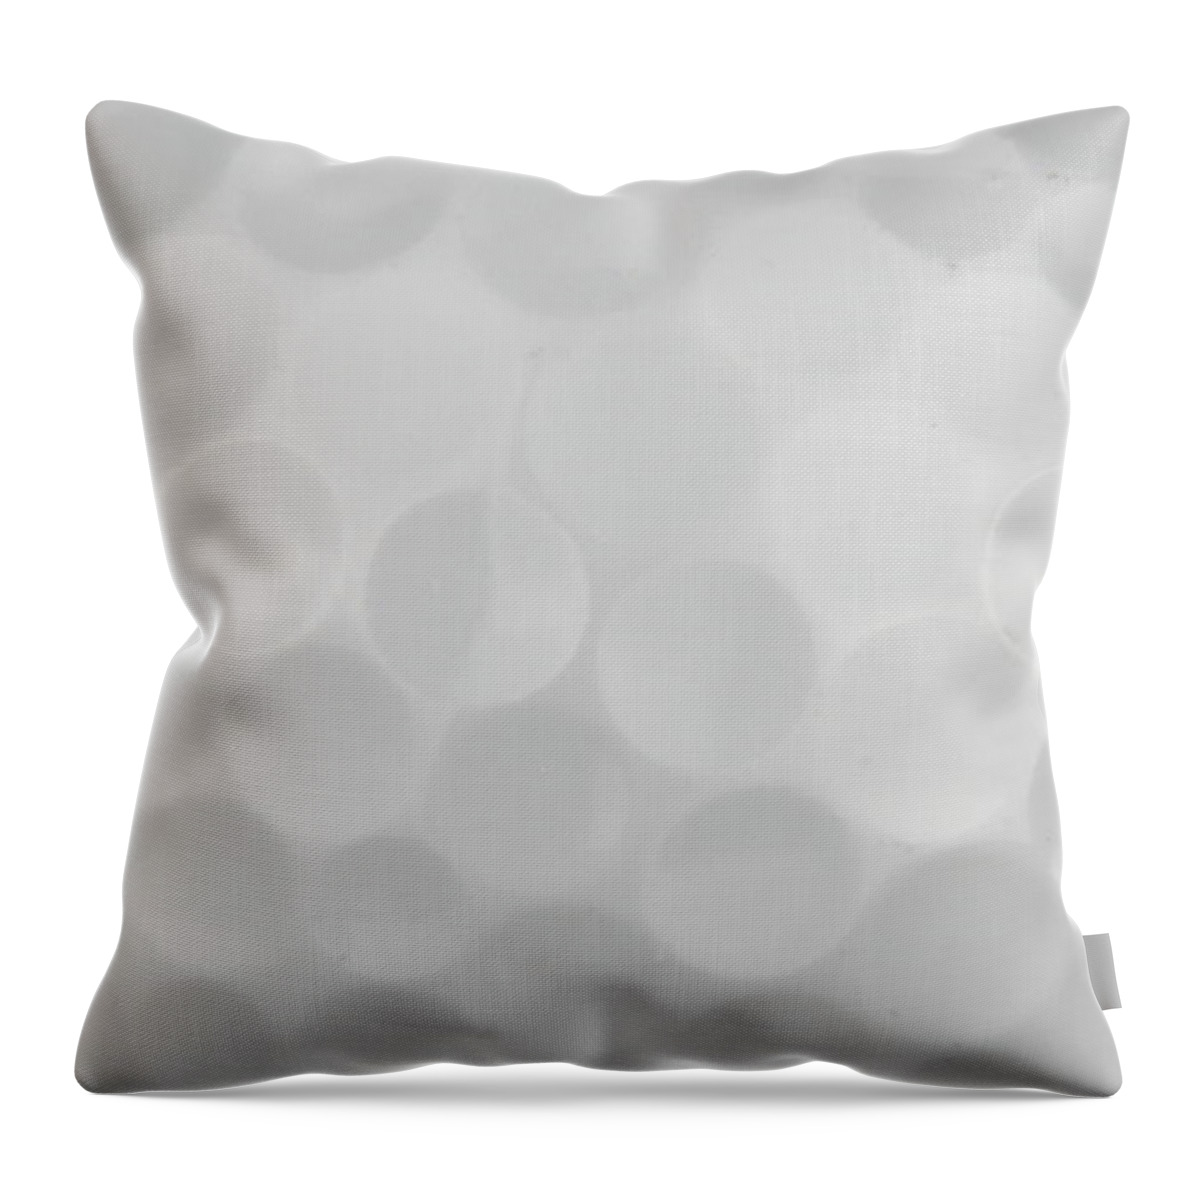 Sport Throw Pillow featuring the photograph Dimples by Lens Art Photography By Larry Trager